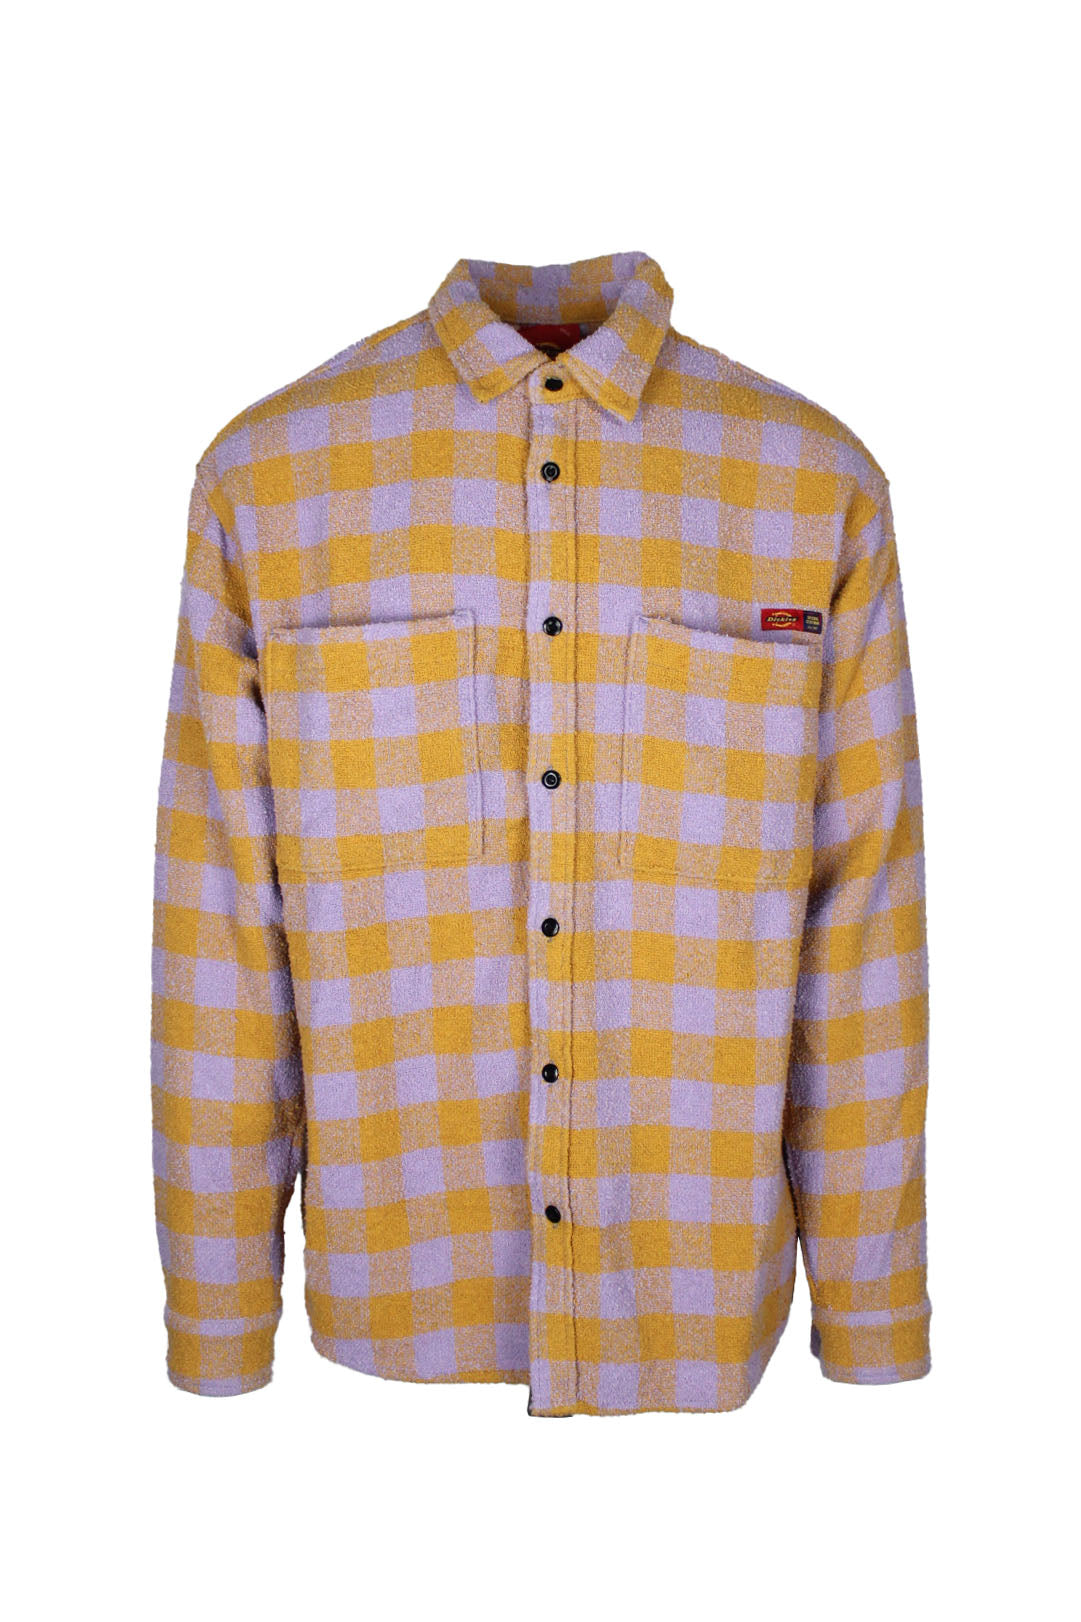 front view of dickies x opening ceremony lilac/honey buffalo plaid long sleeve button up shirt. features ‘dickies x opening ceremony’ logo tag above left breast pocket and buttons at cuffs.